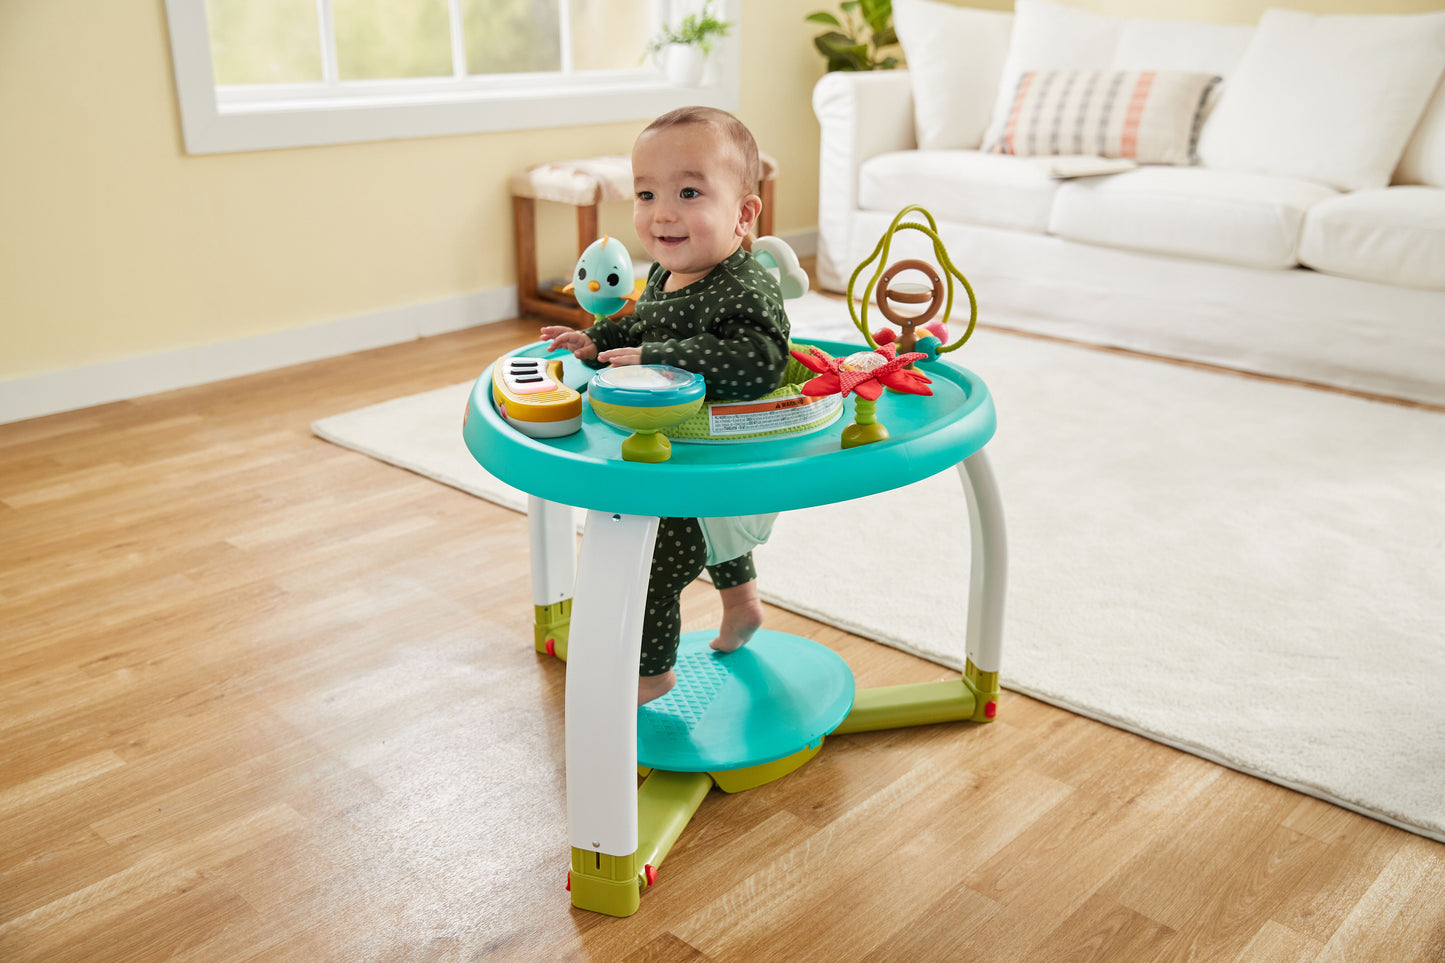 Meadow Days 5-in-1 Stationary Activity Center